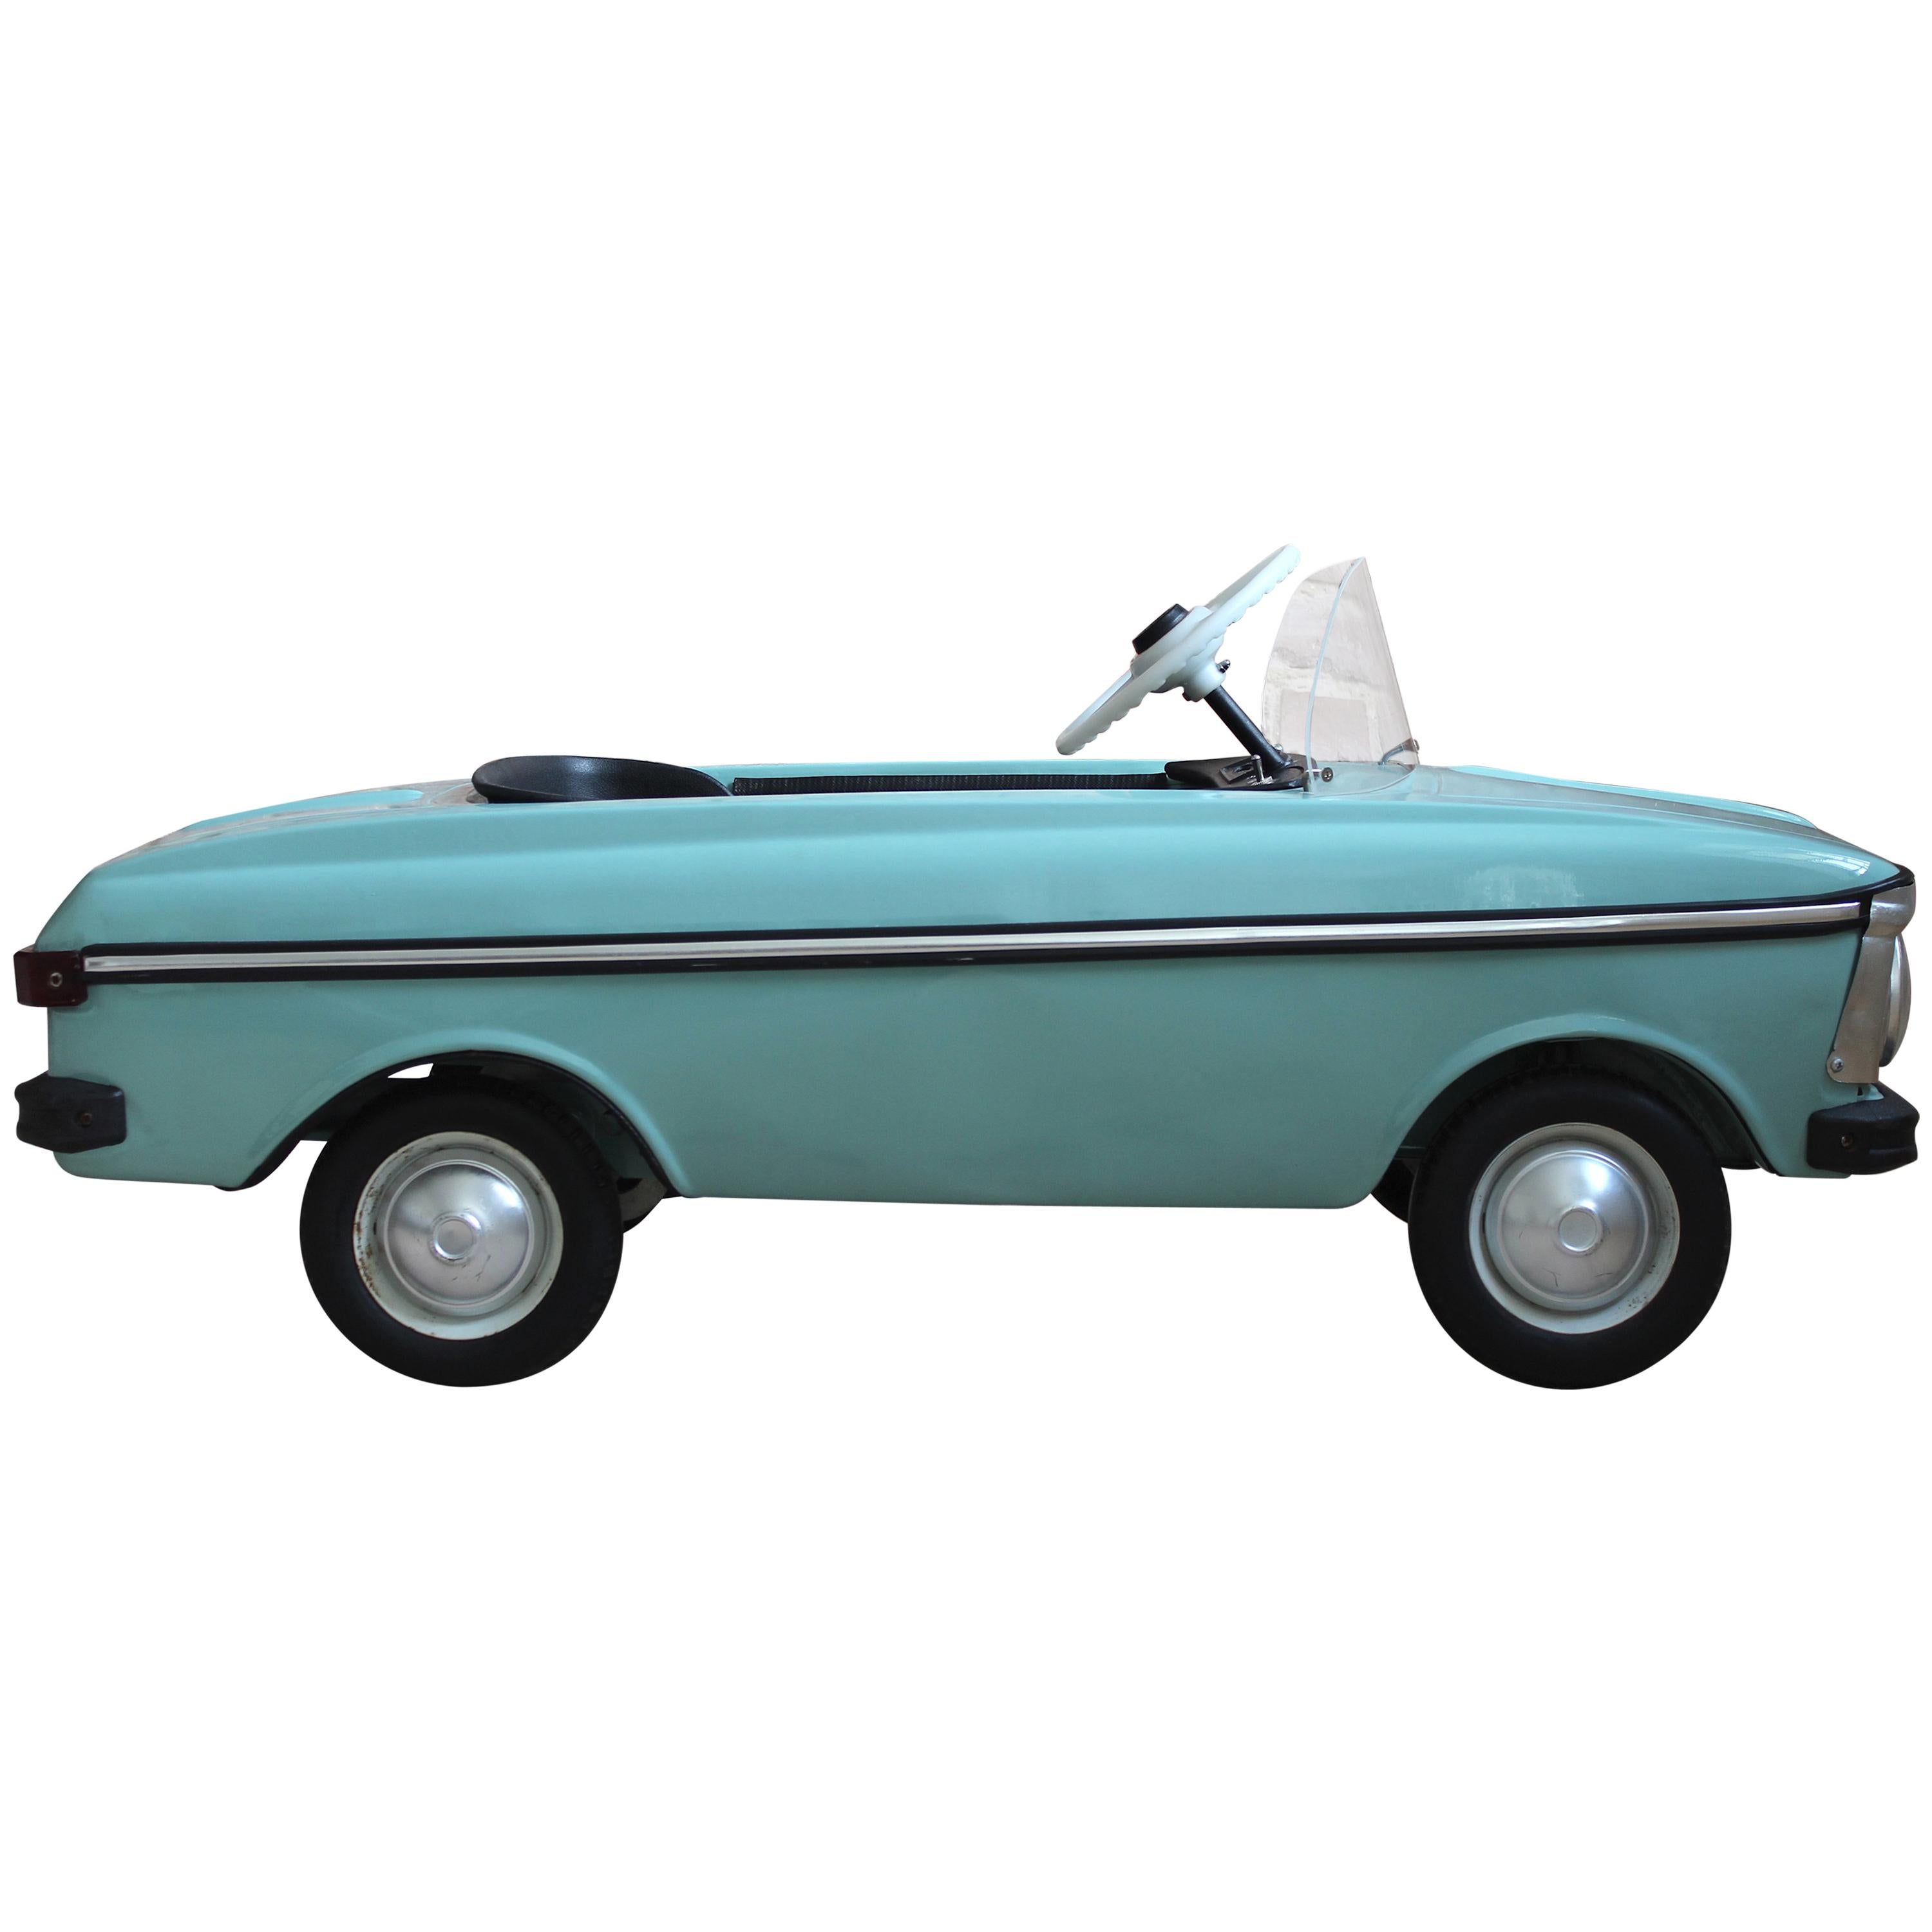 This early Soviet child's pedal car was manufactured during the communist era in former Czechoslovakia. It was created as a model for children as a small copy of the original Moskvich car and works on a pedal moving system. The piece features fully